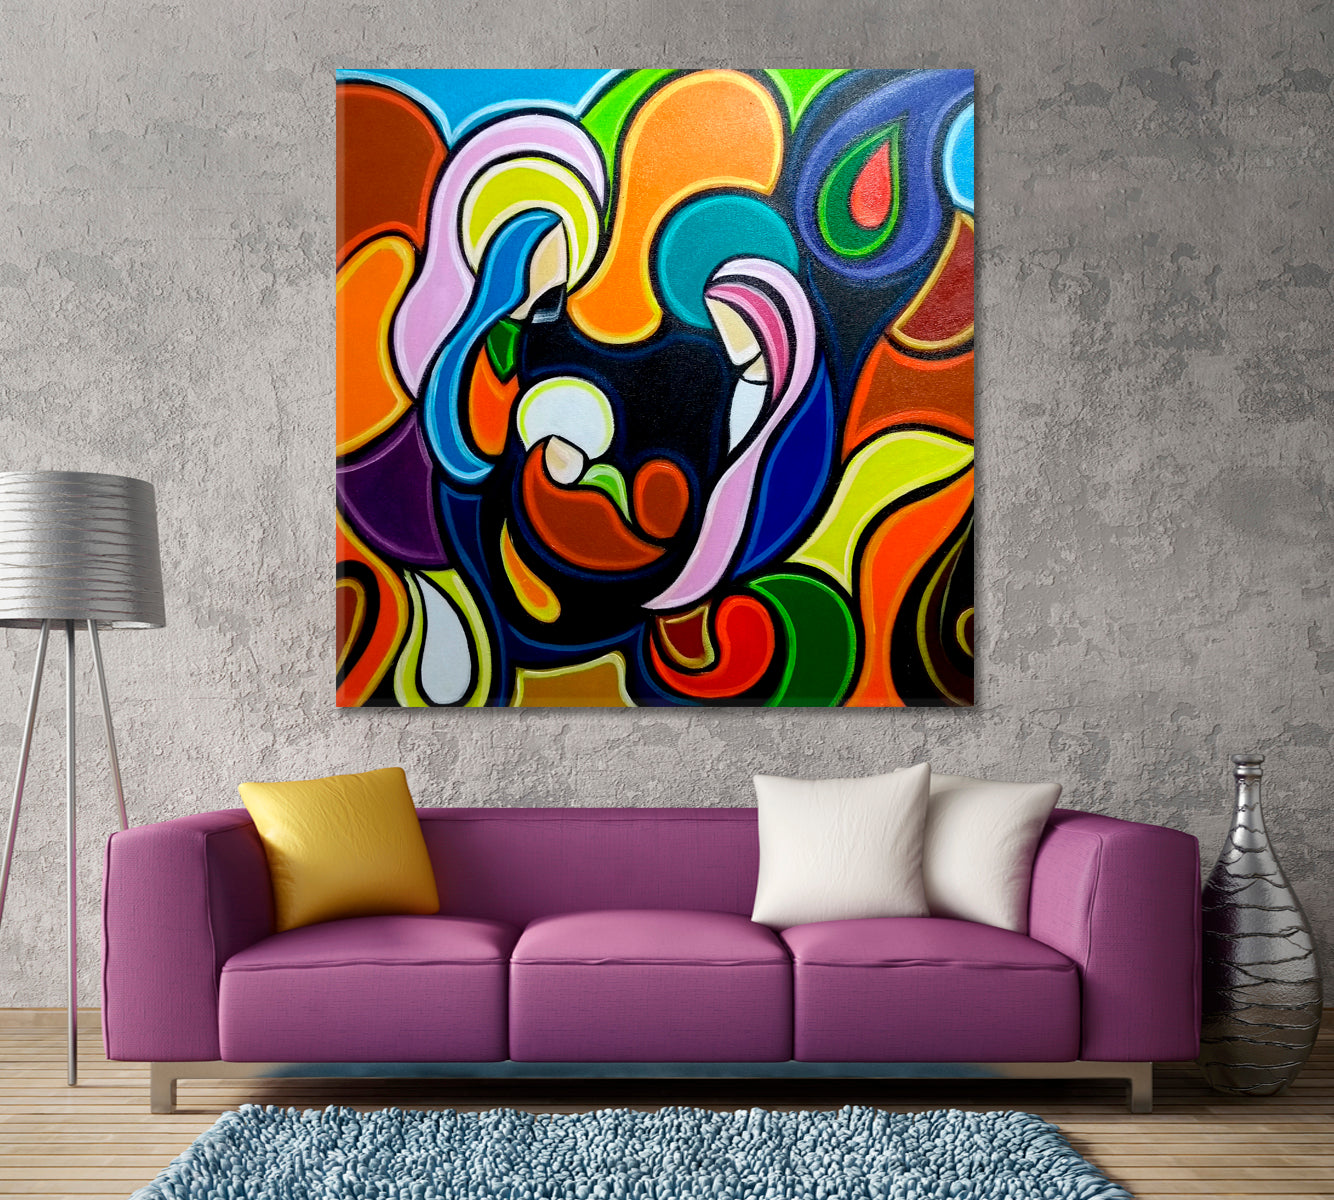 GOD IN ART Abstract Figurative Painting Religious Modern Art Artesty   